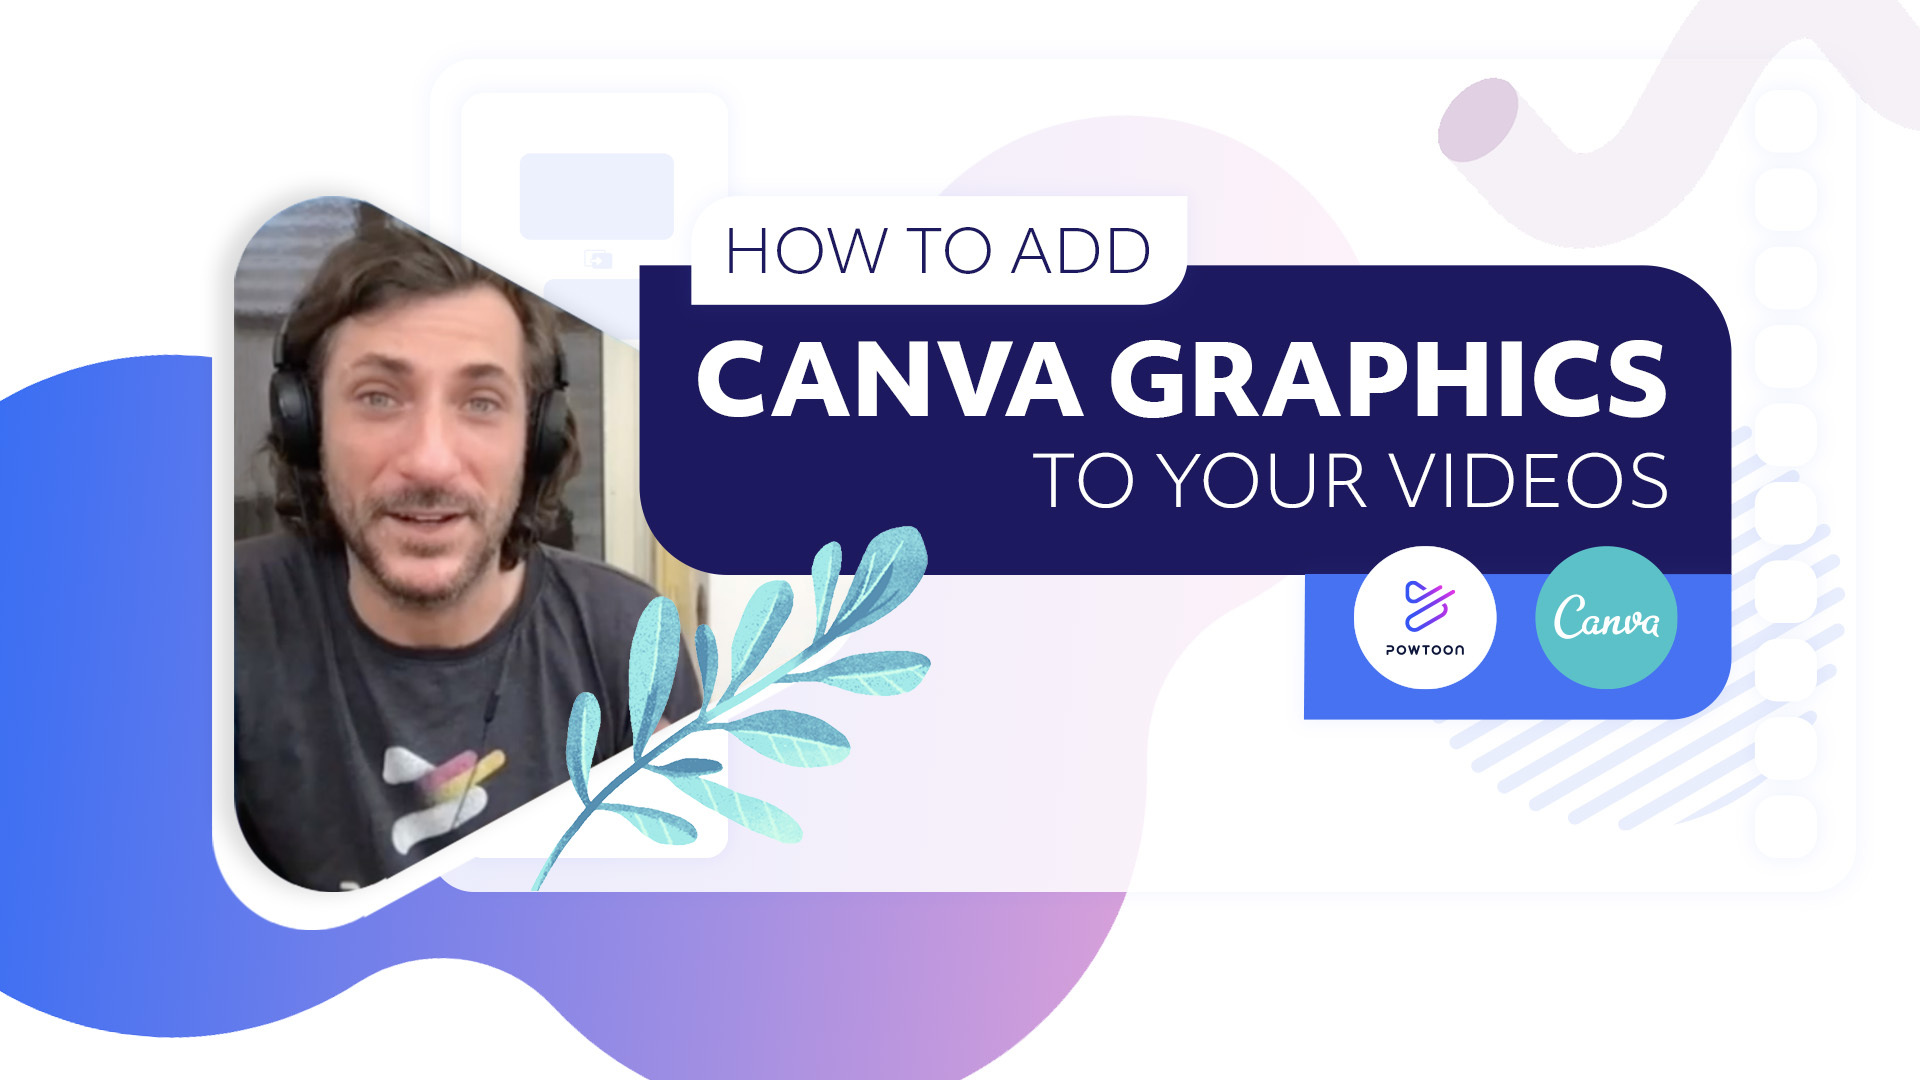 How to add canva graphics to your videos